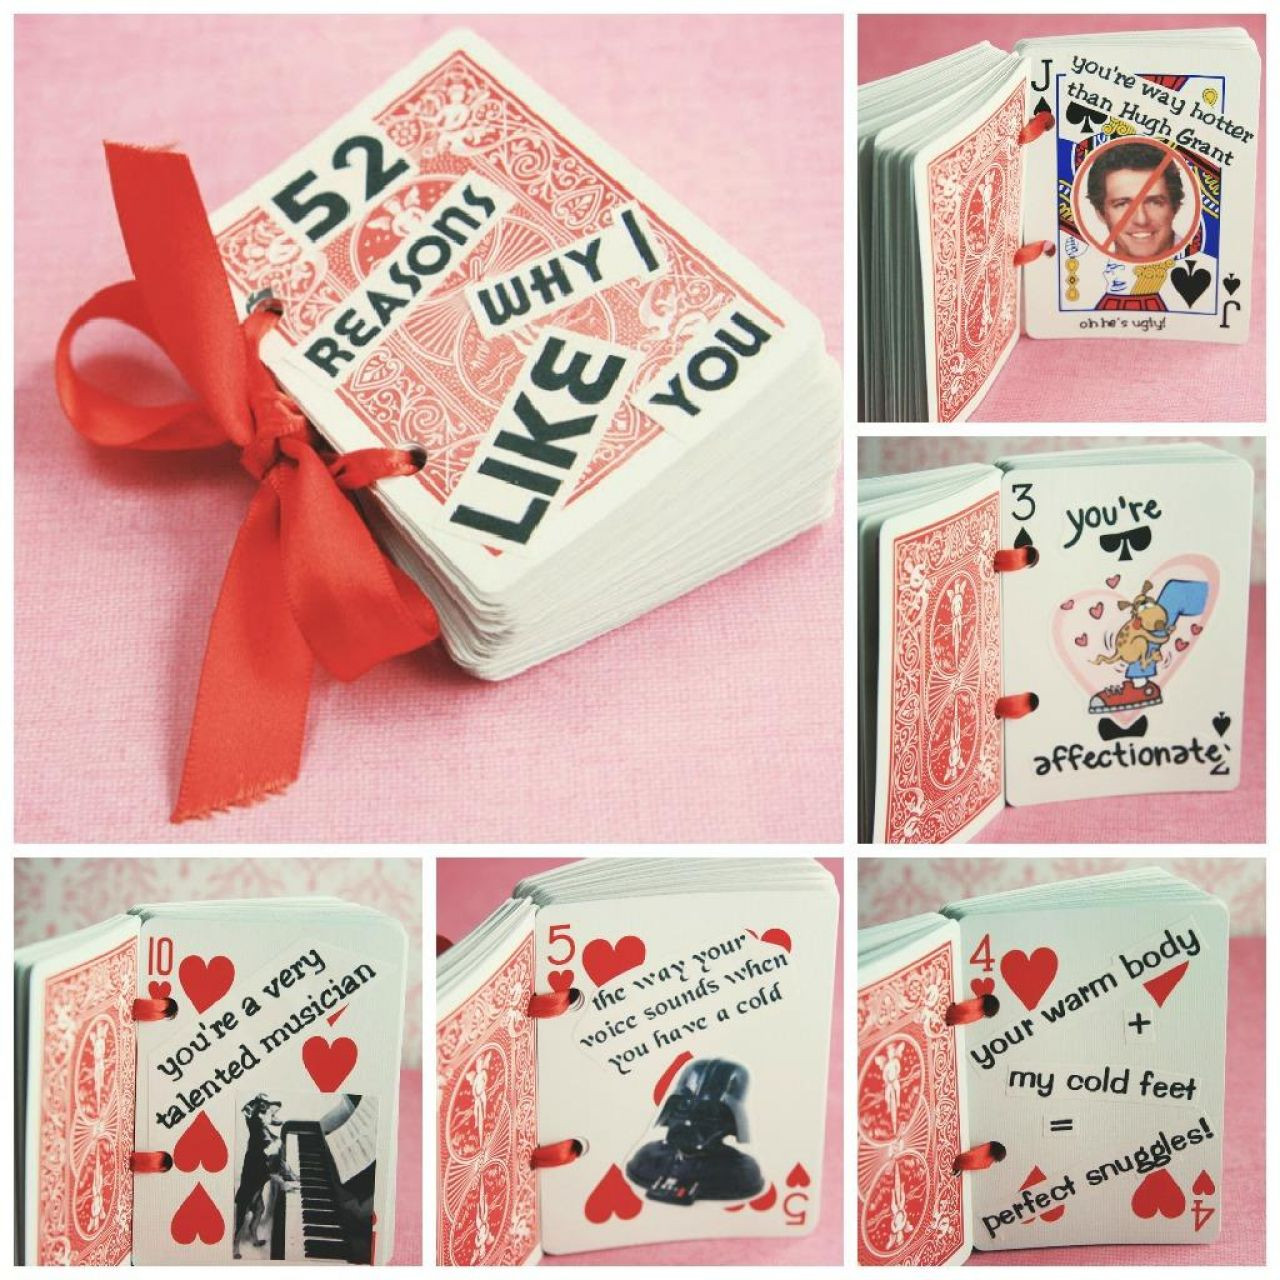 Creatives Ideas For Valentines Day
 24 LOVELY VALENTINE S DAY GIFTS FOR YOUR BOYFRIEND